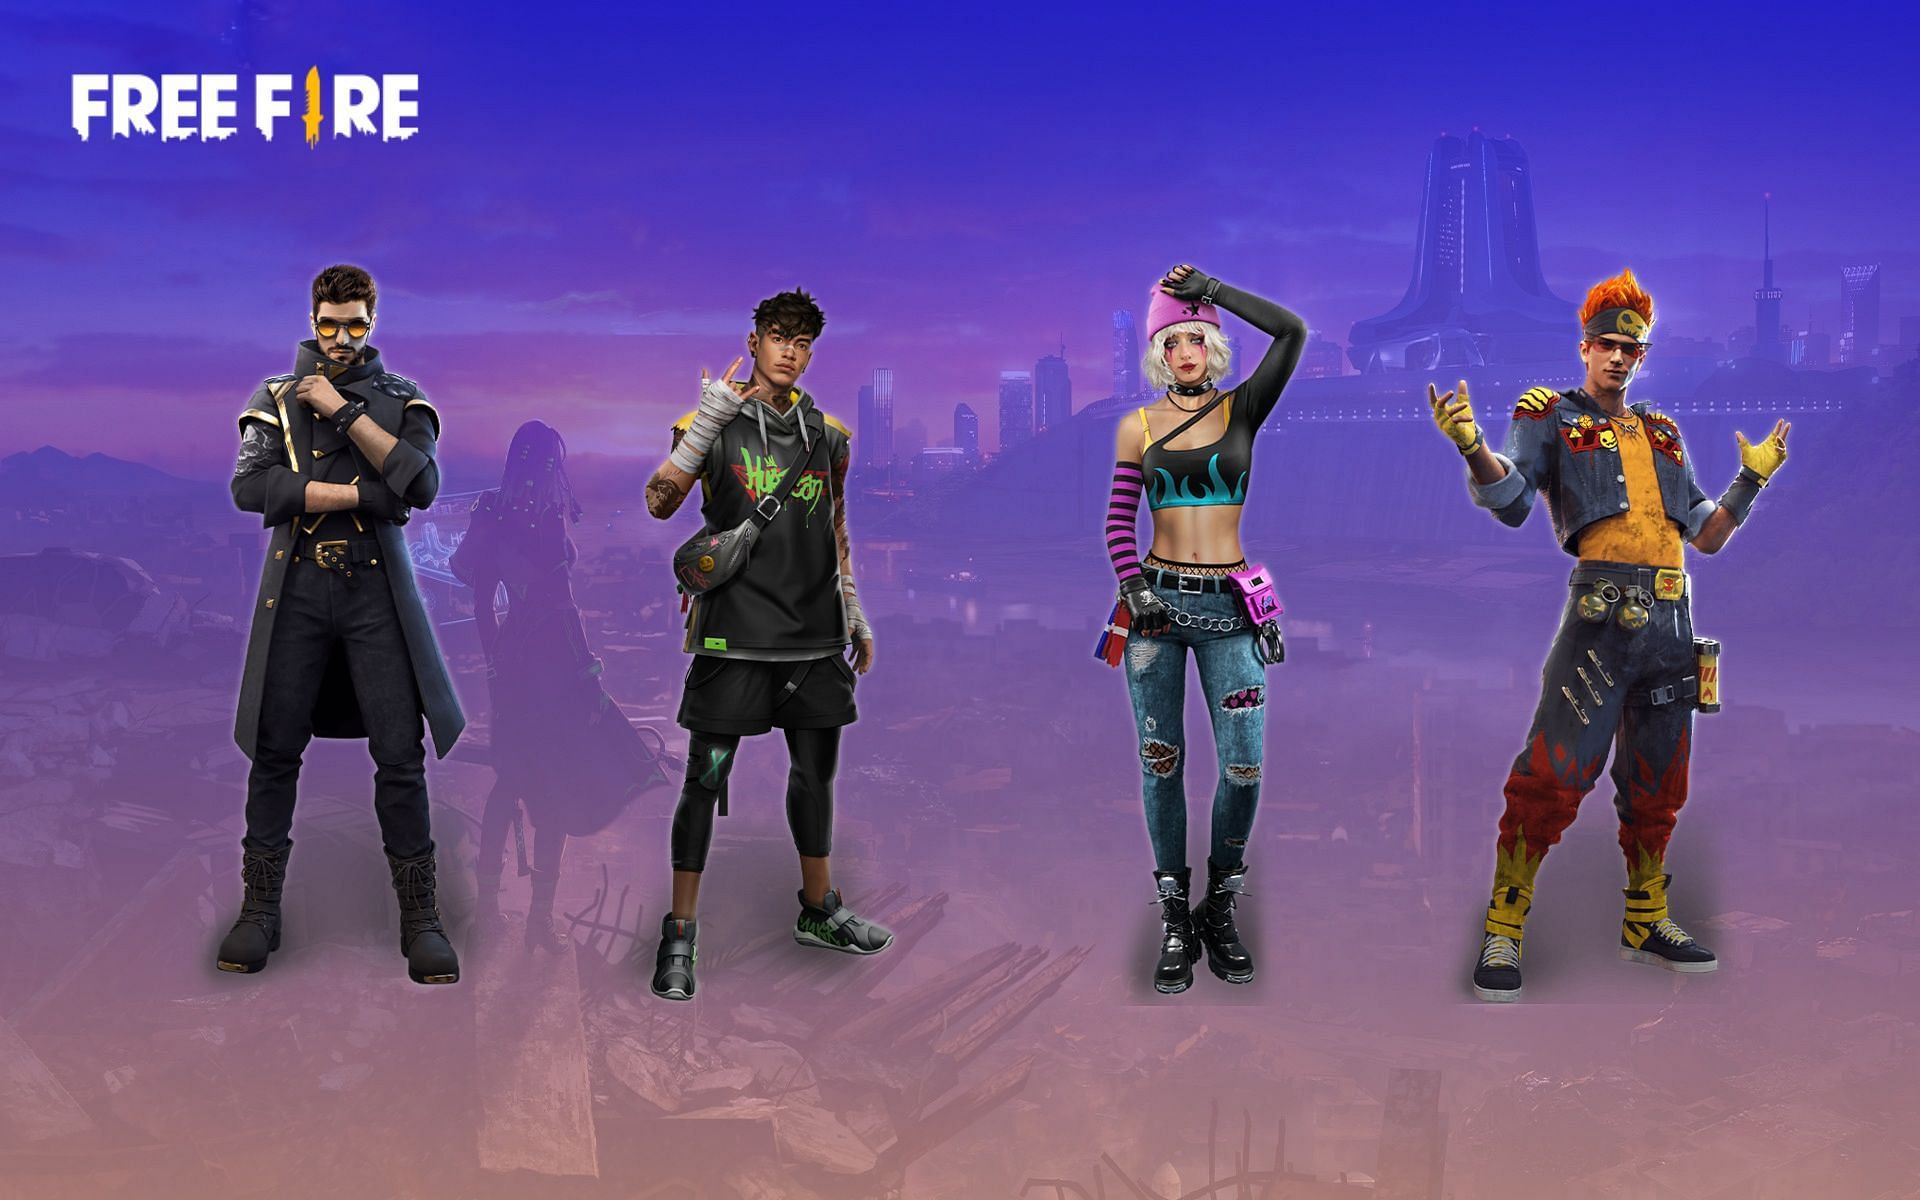 5 best Free Fire character combinations to rank push easily (May 2022)